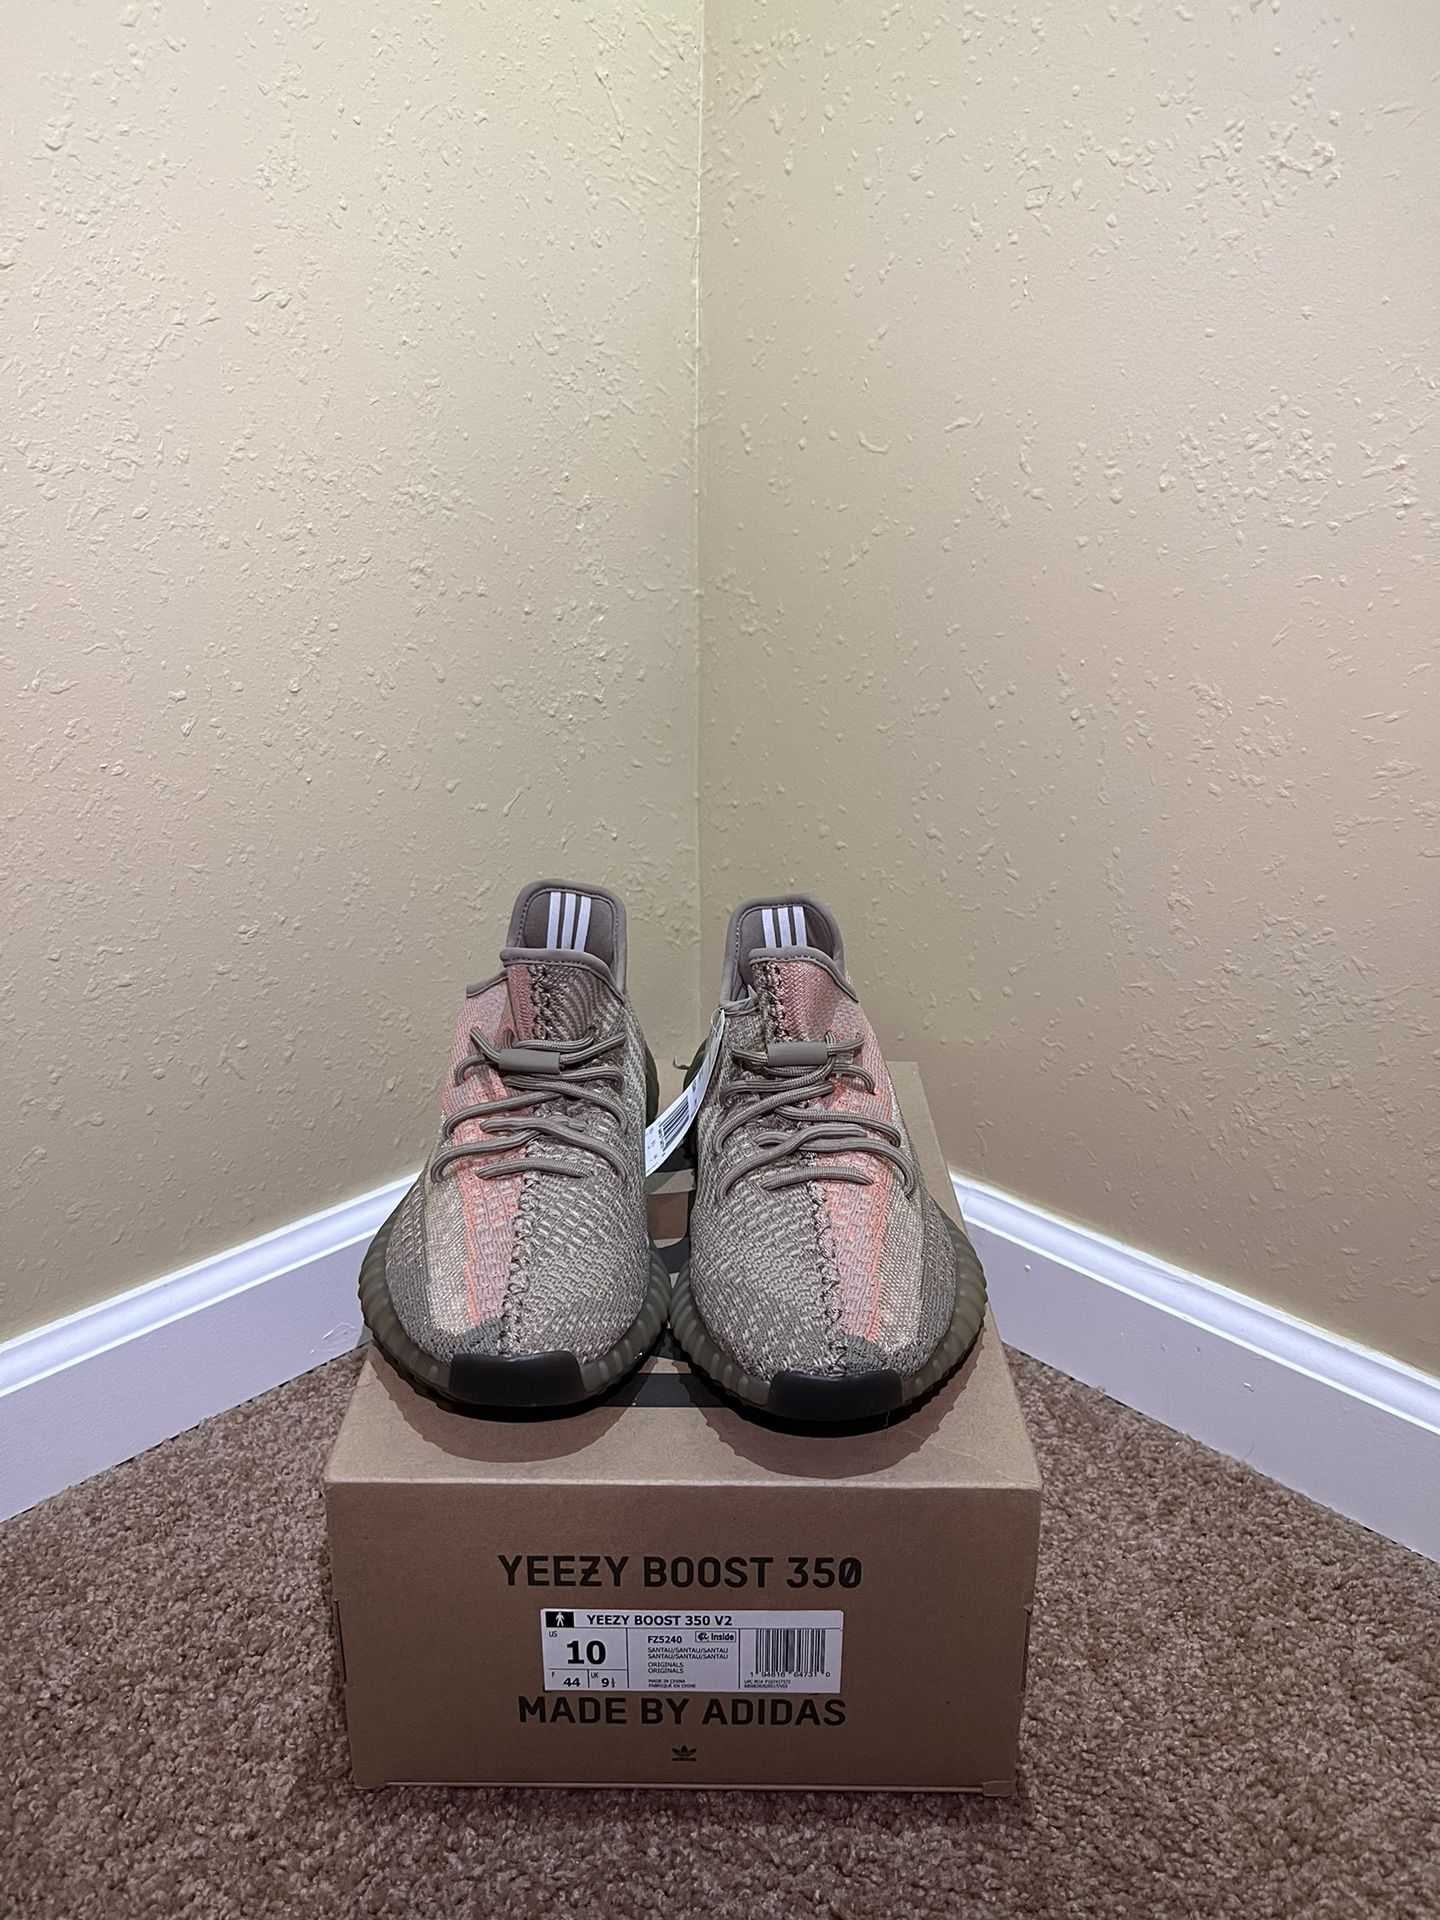 Adidas Yeezy 350 "sand taupe" Size: 10 Brand New OG All $240